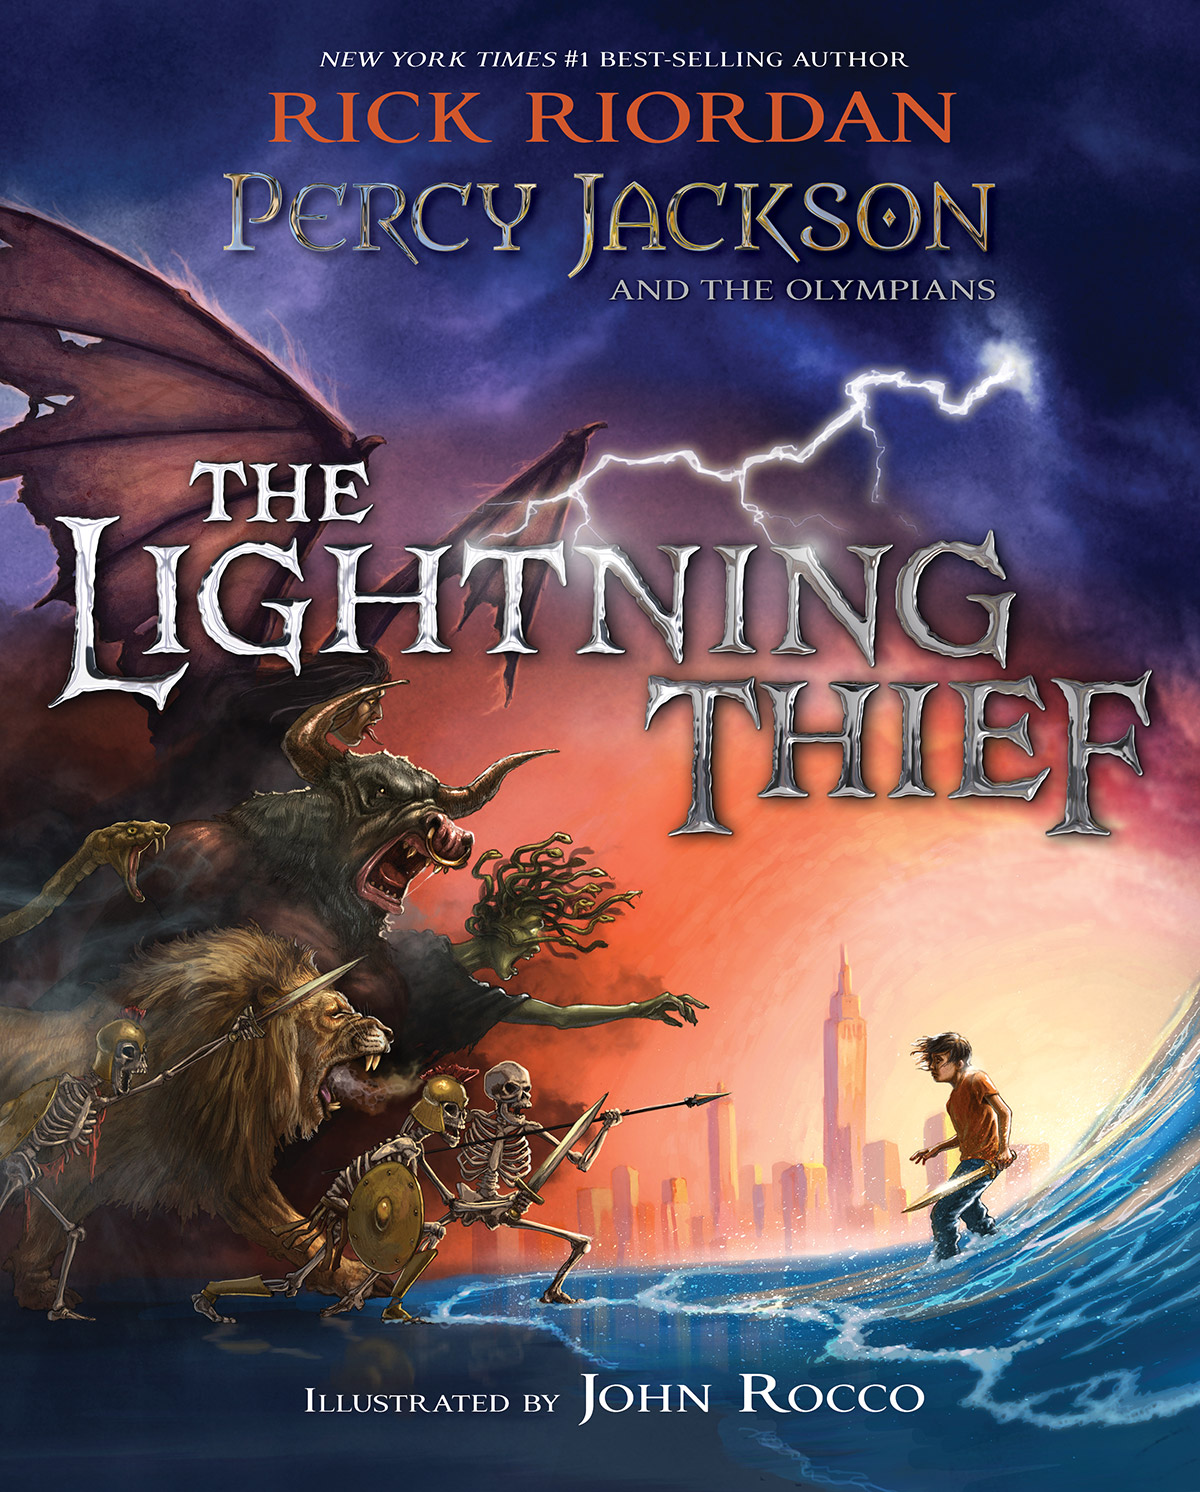 Percy Jackson and the Olympians: The Lightning Thief: Illustrated Edition ( Book 1), by Rick Riordan